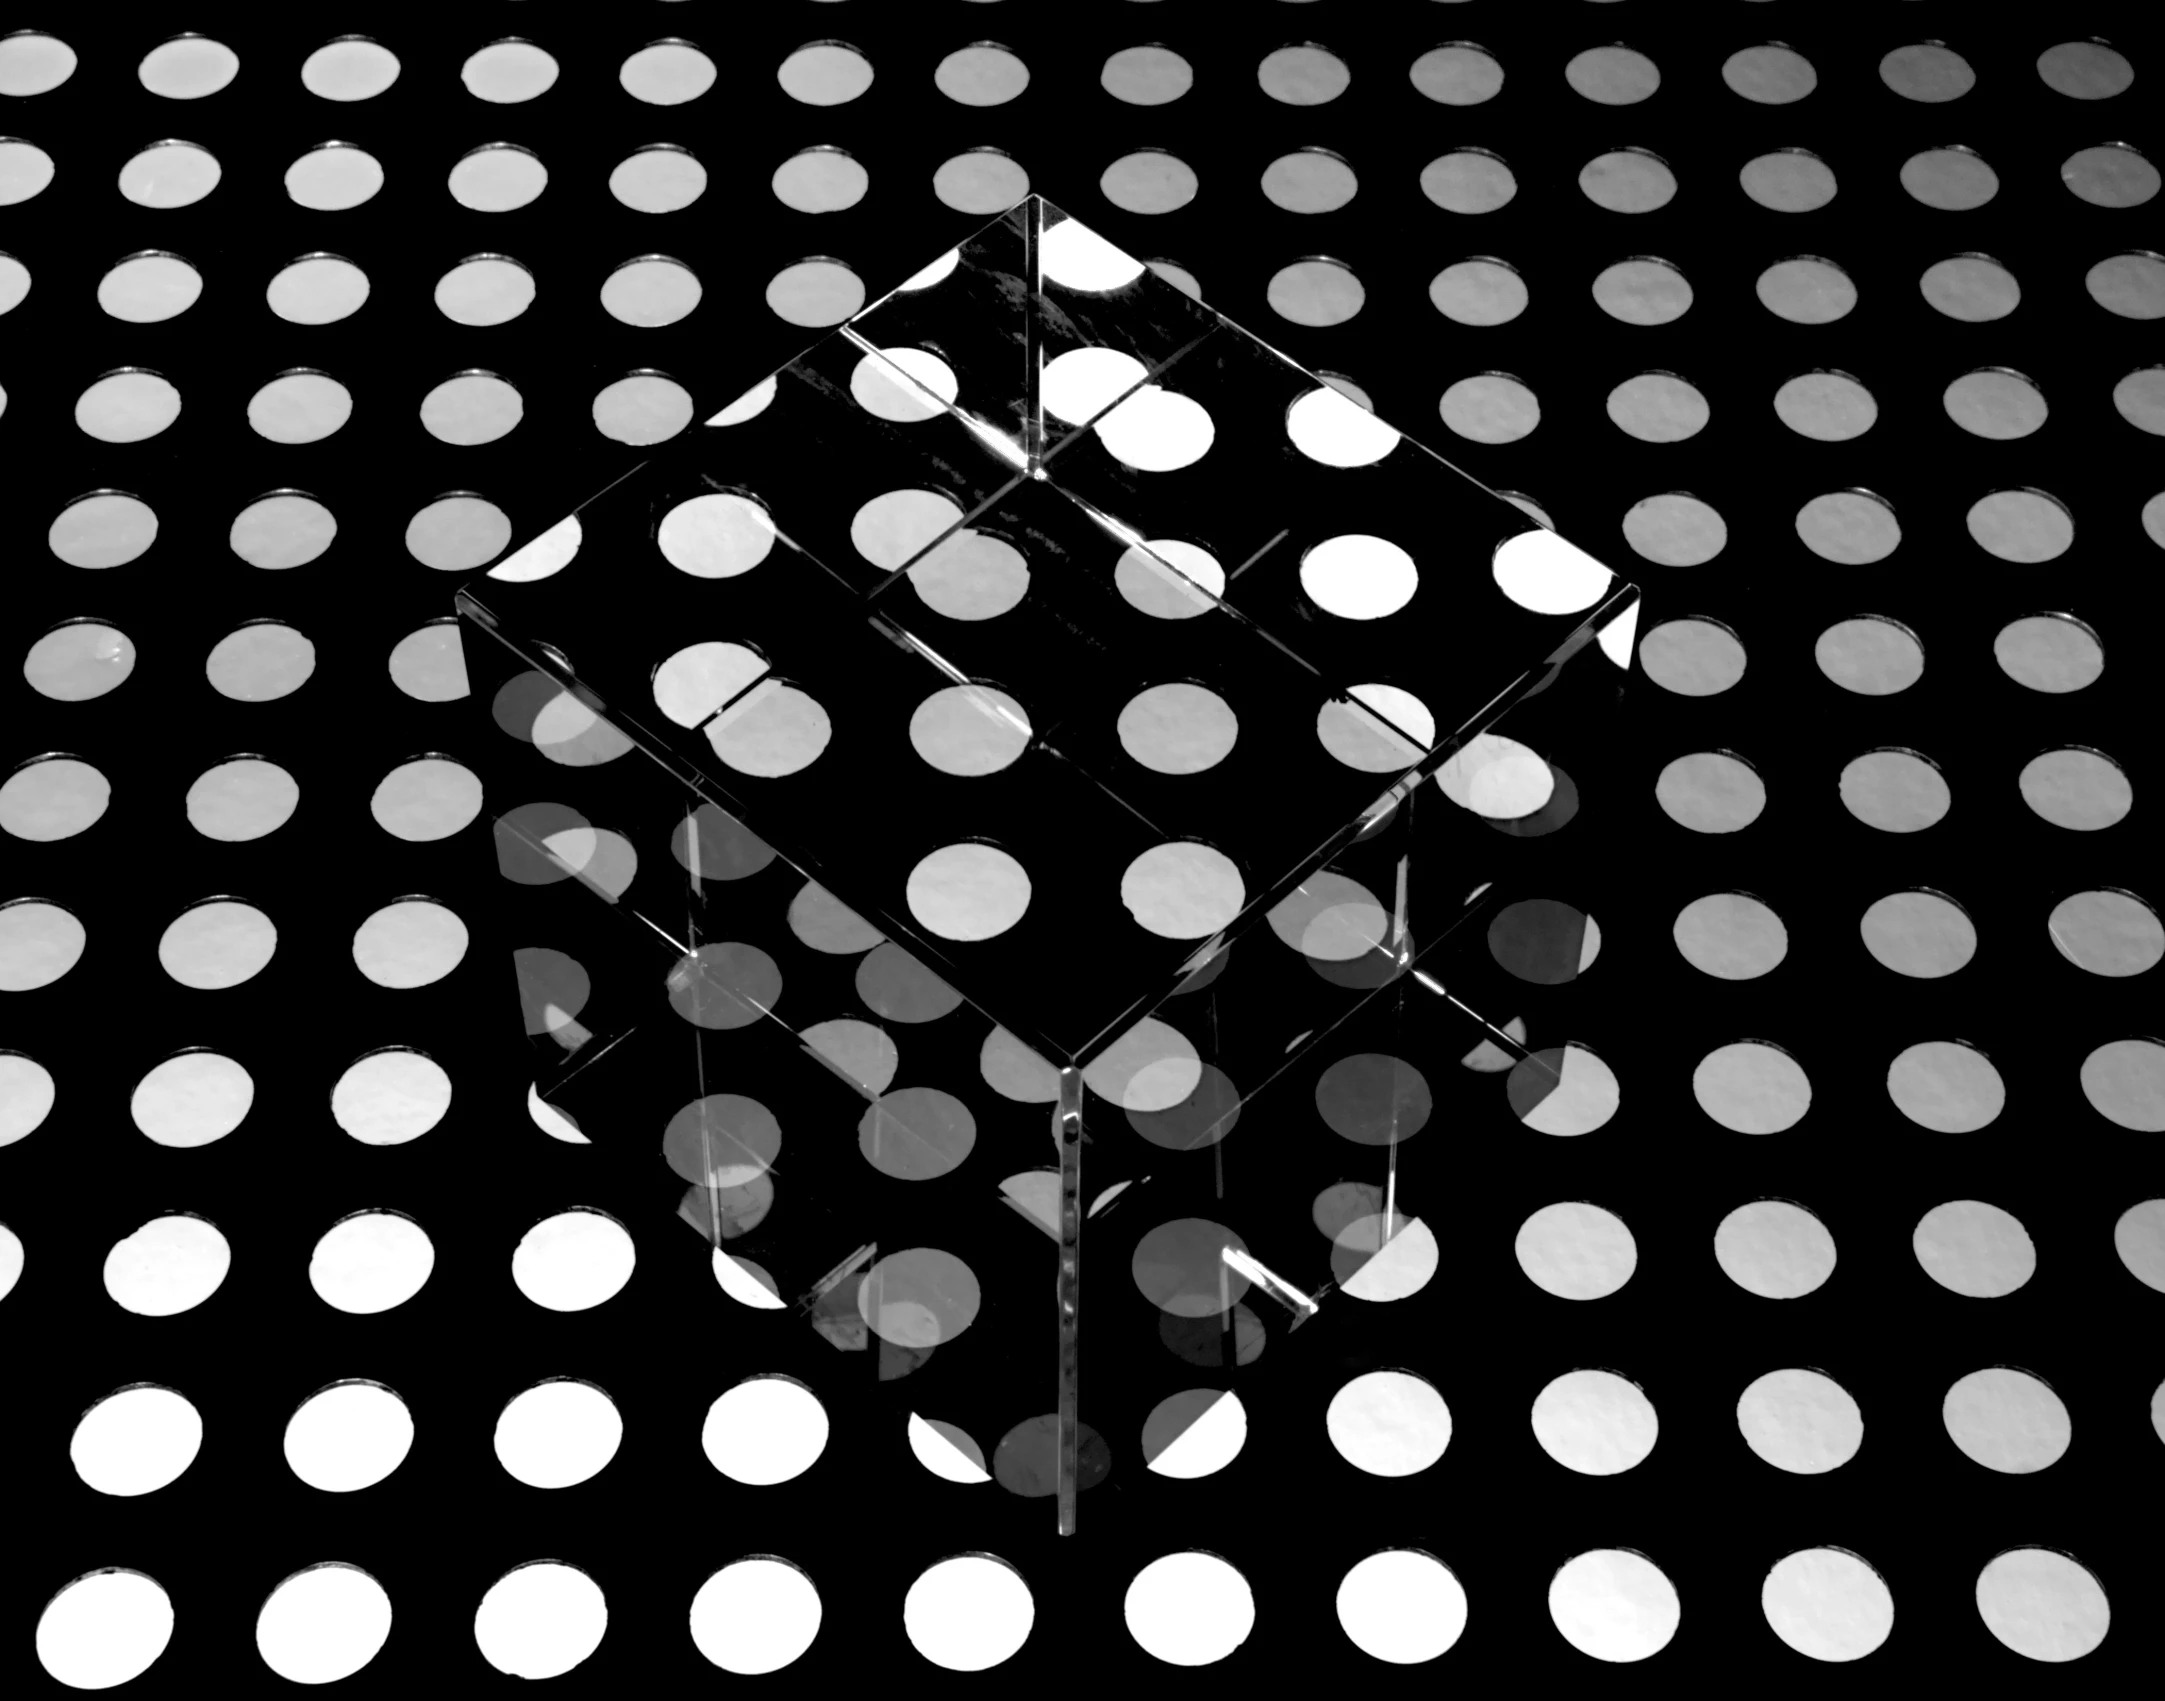 white polka dots are in front of a black background